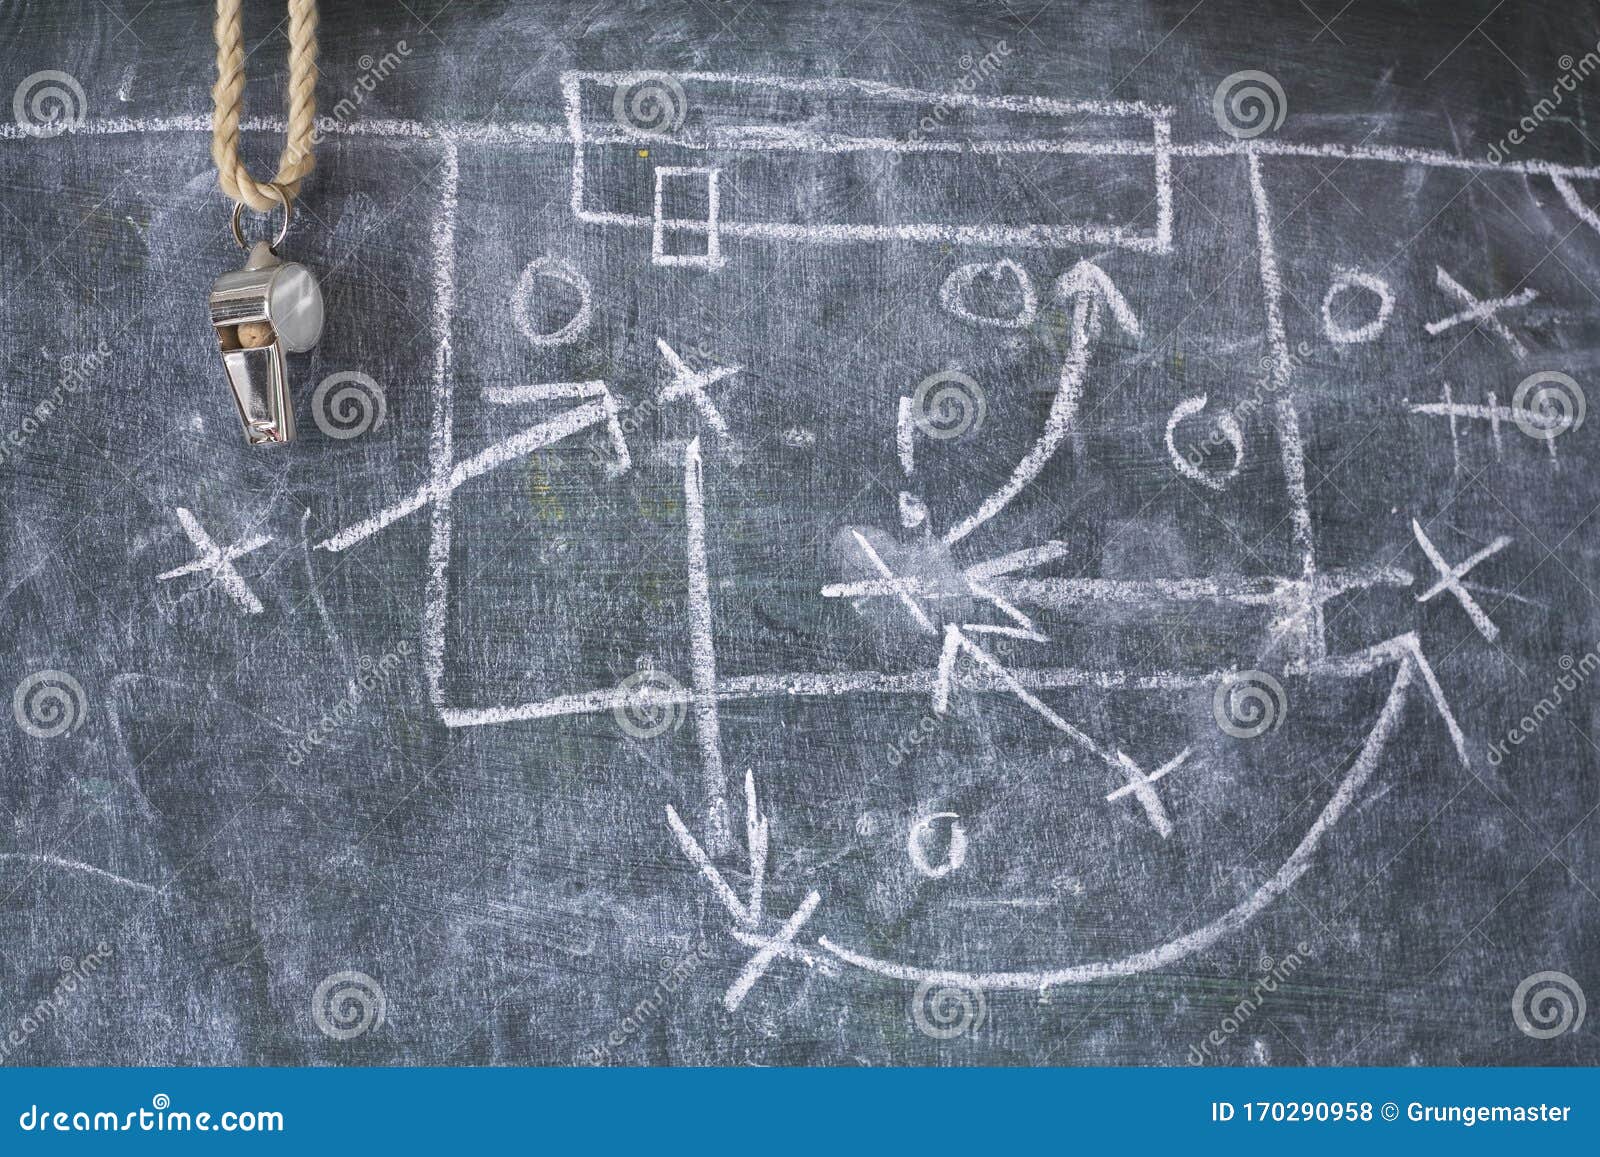 soccer tactics diagram scribble and whistle of soccer or football referee on a black board, copy space